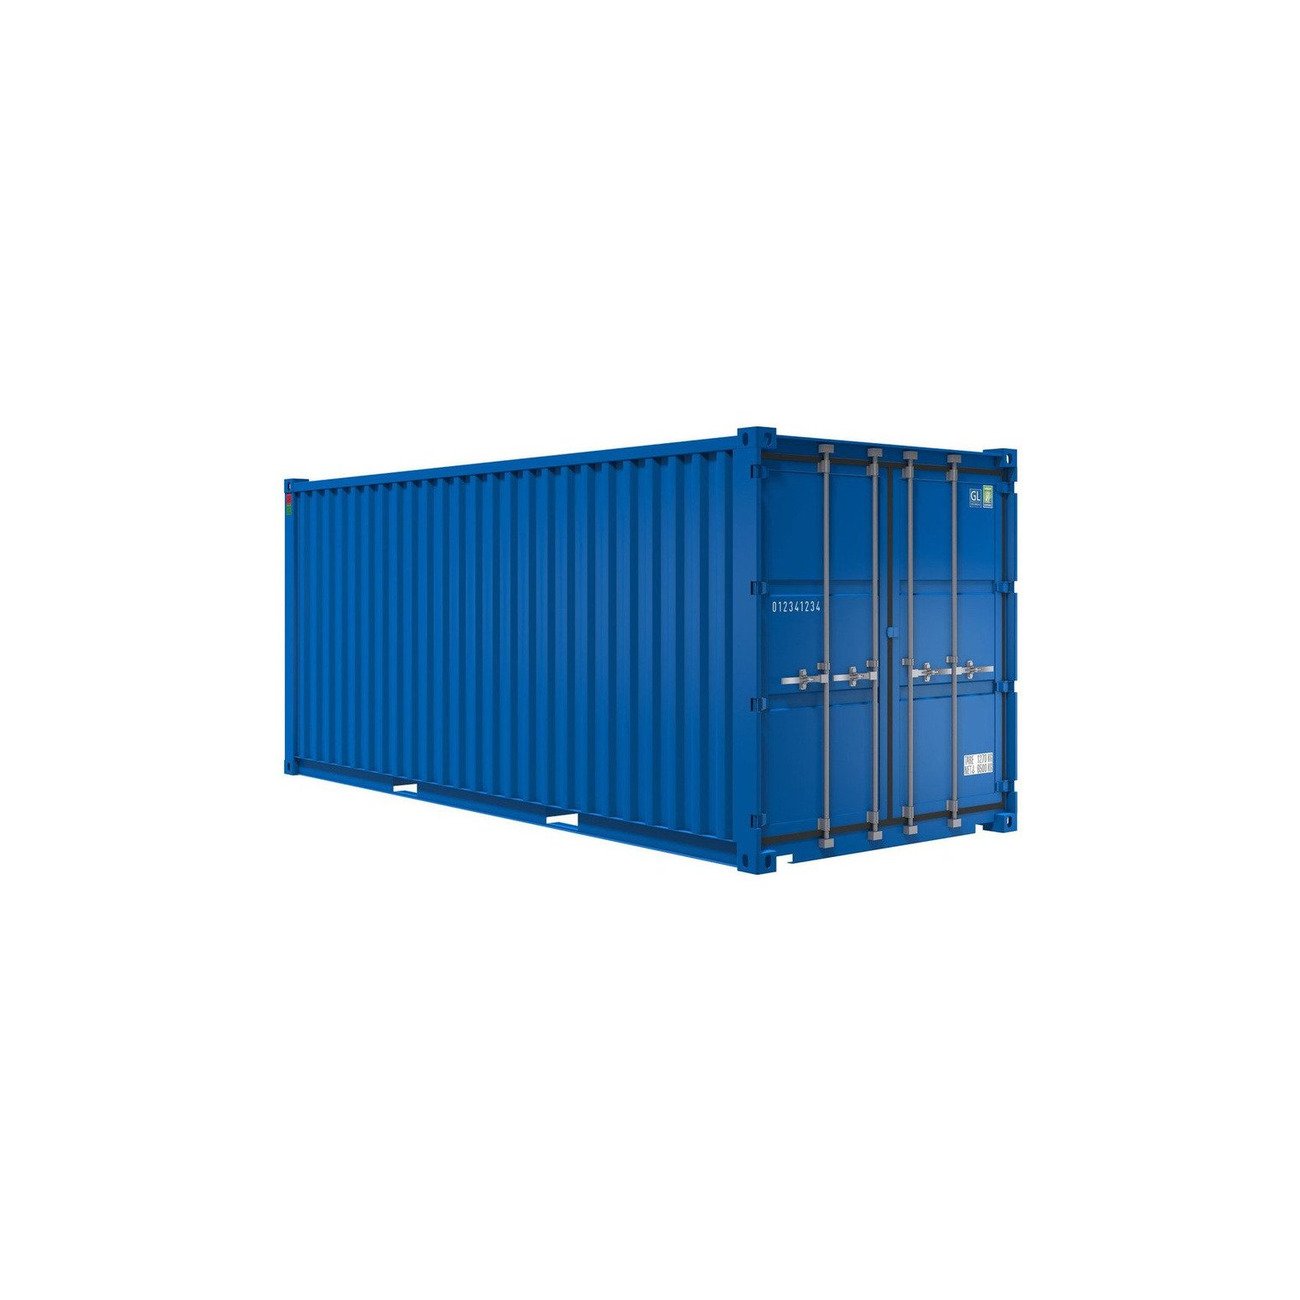 20’ DV CONTAINEX shippingcontainer